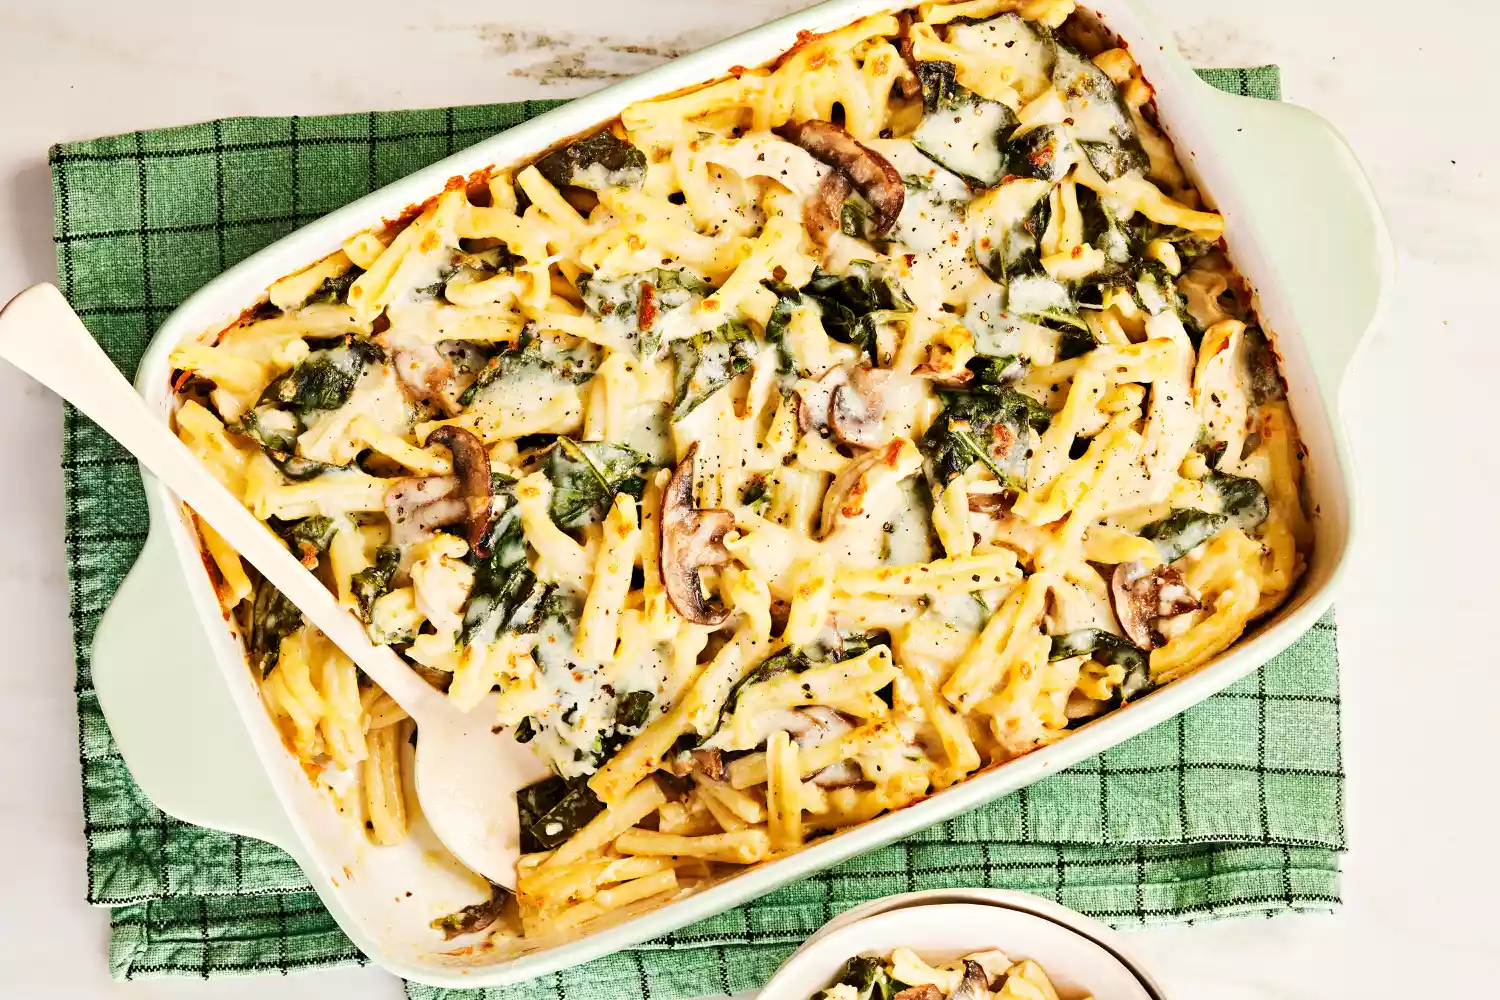 Southern Living Creamy Turkey Pasta Bake in the baking dish to serve